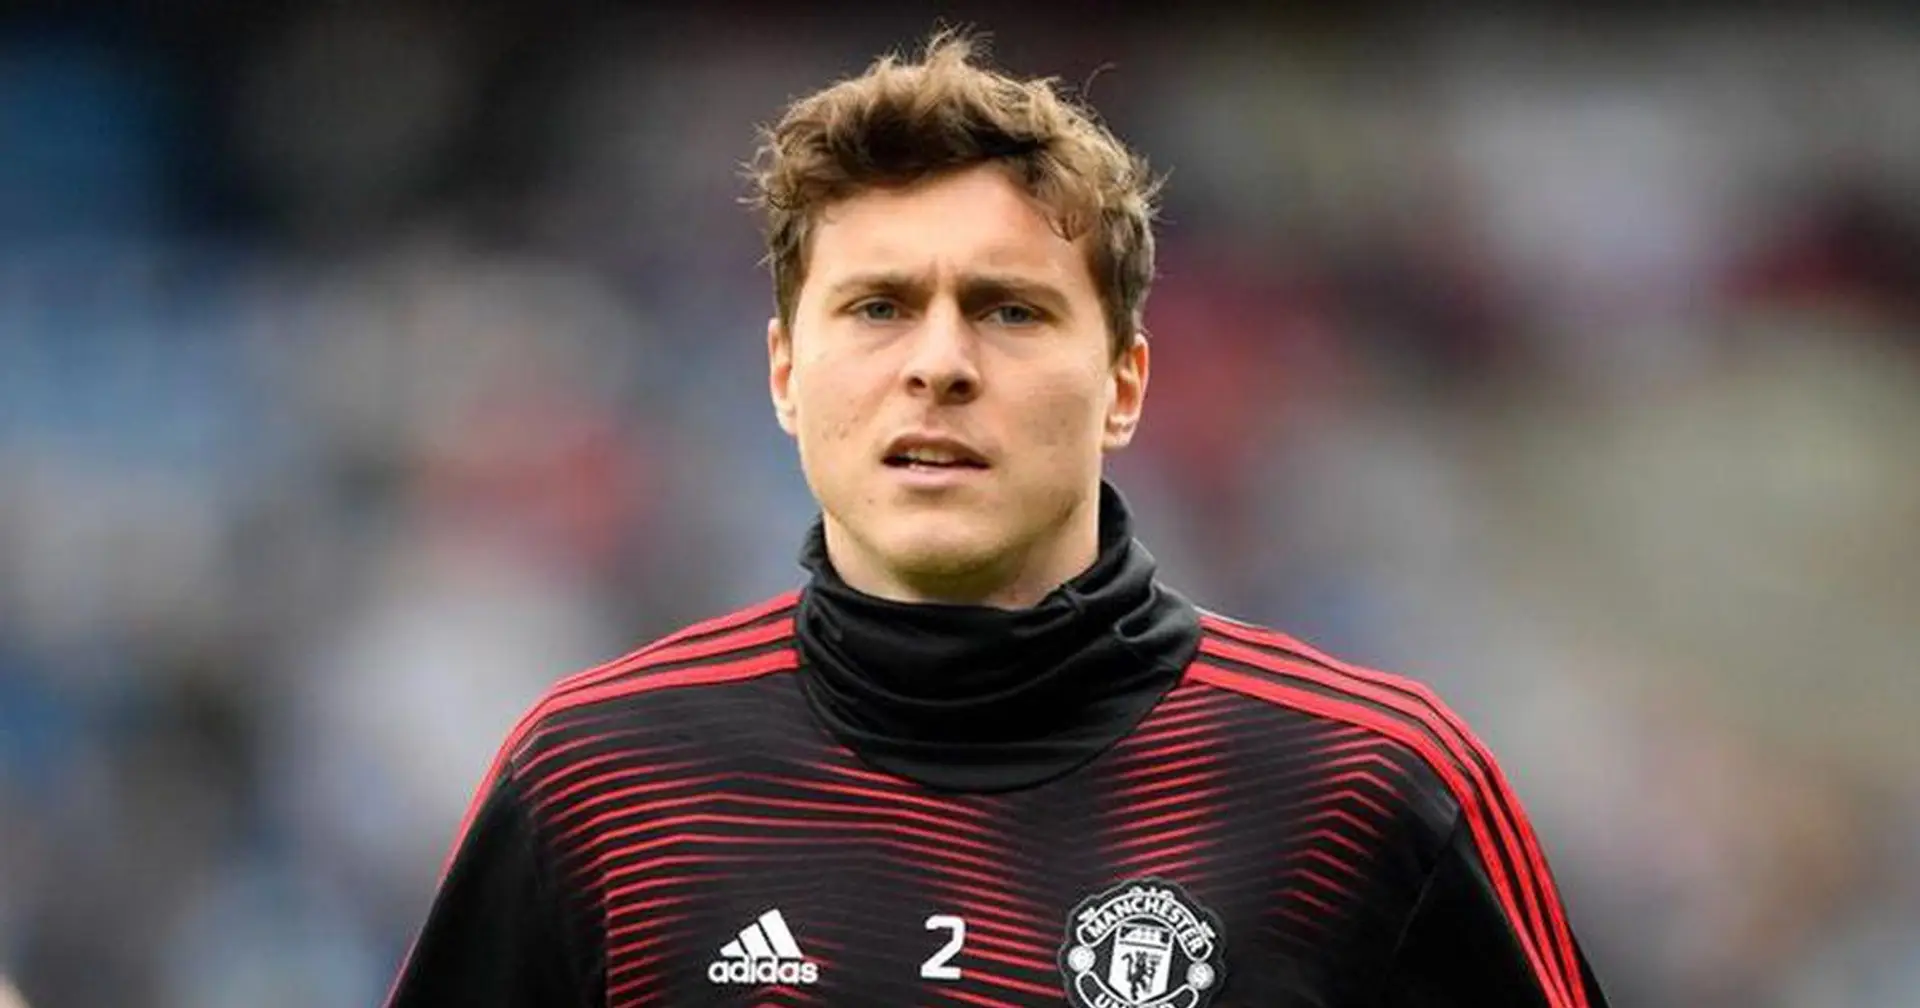 ‘I’ve struggled through matches’: Lindelof reveals he played with back injury in recent games